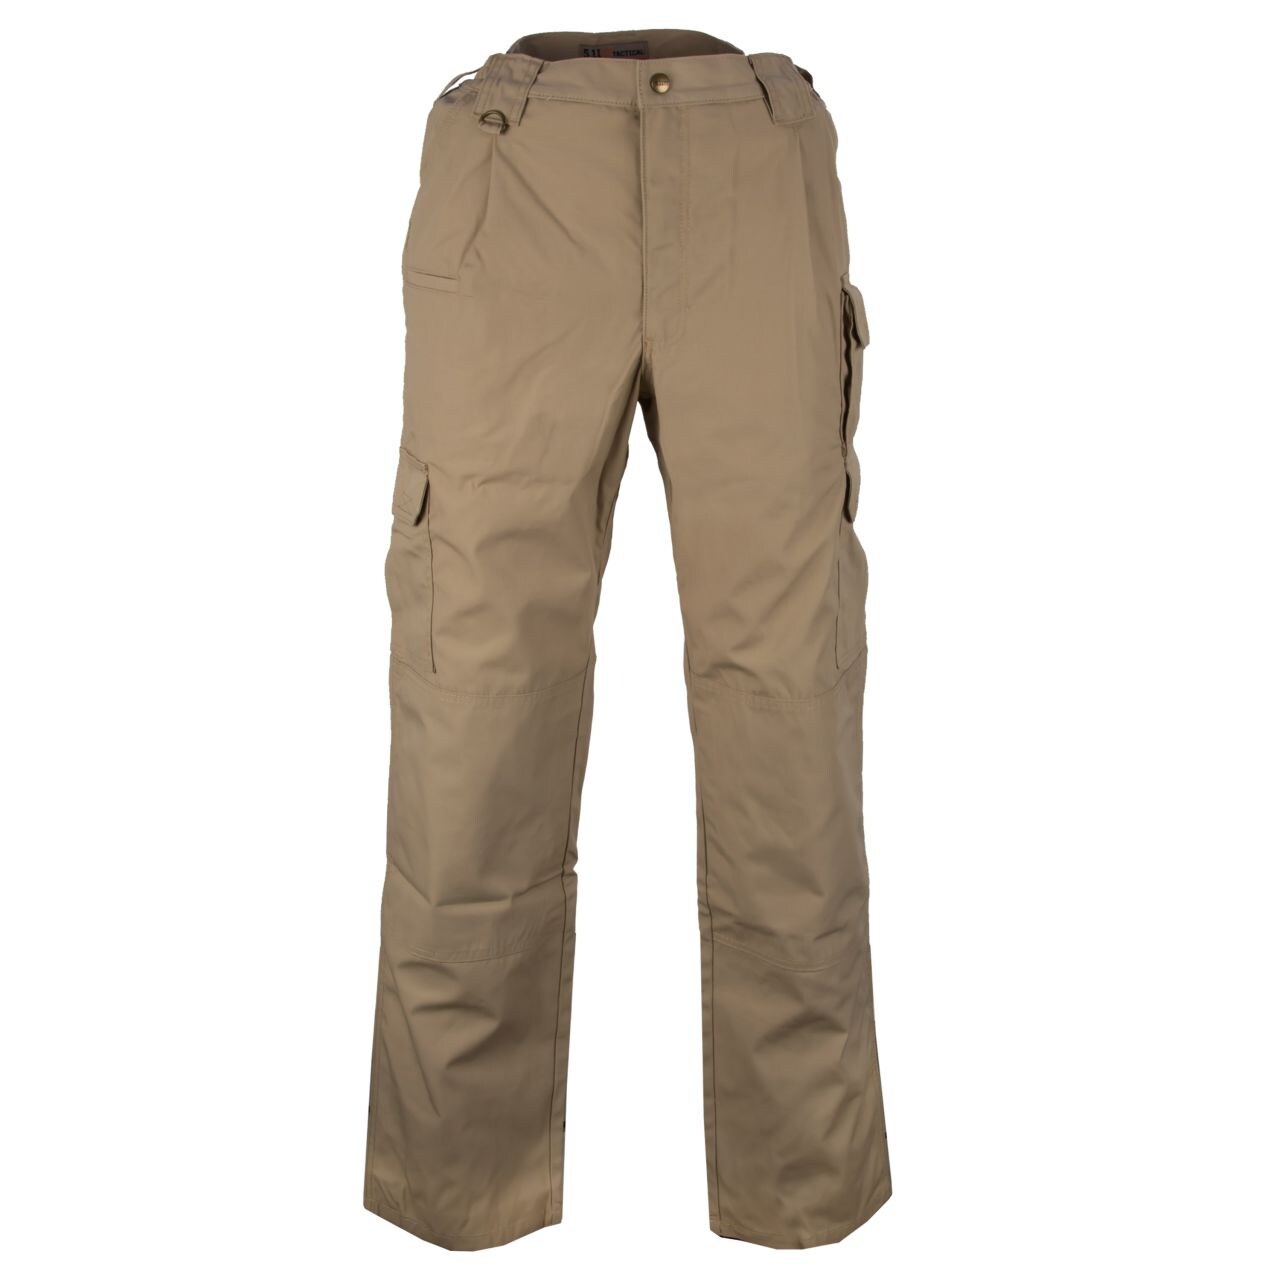 Purchase the 5.11 Taclite Pro Pants black by ASMC